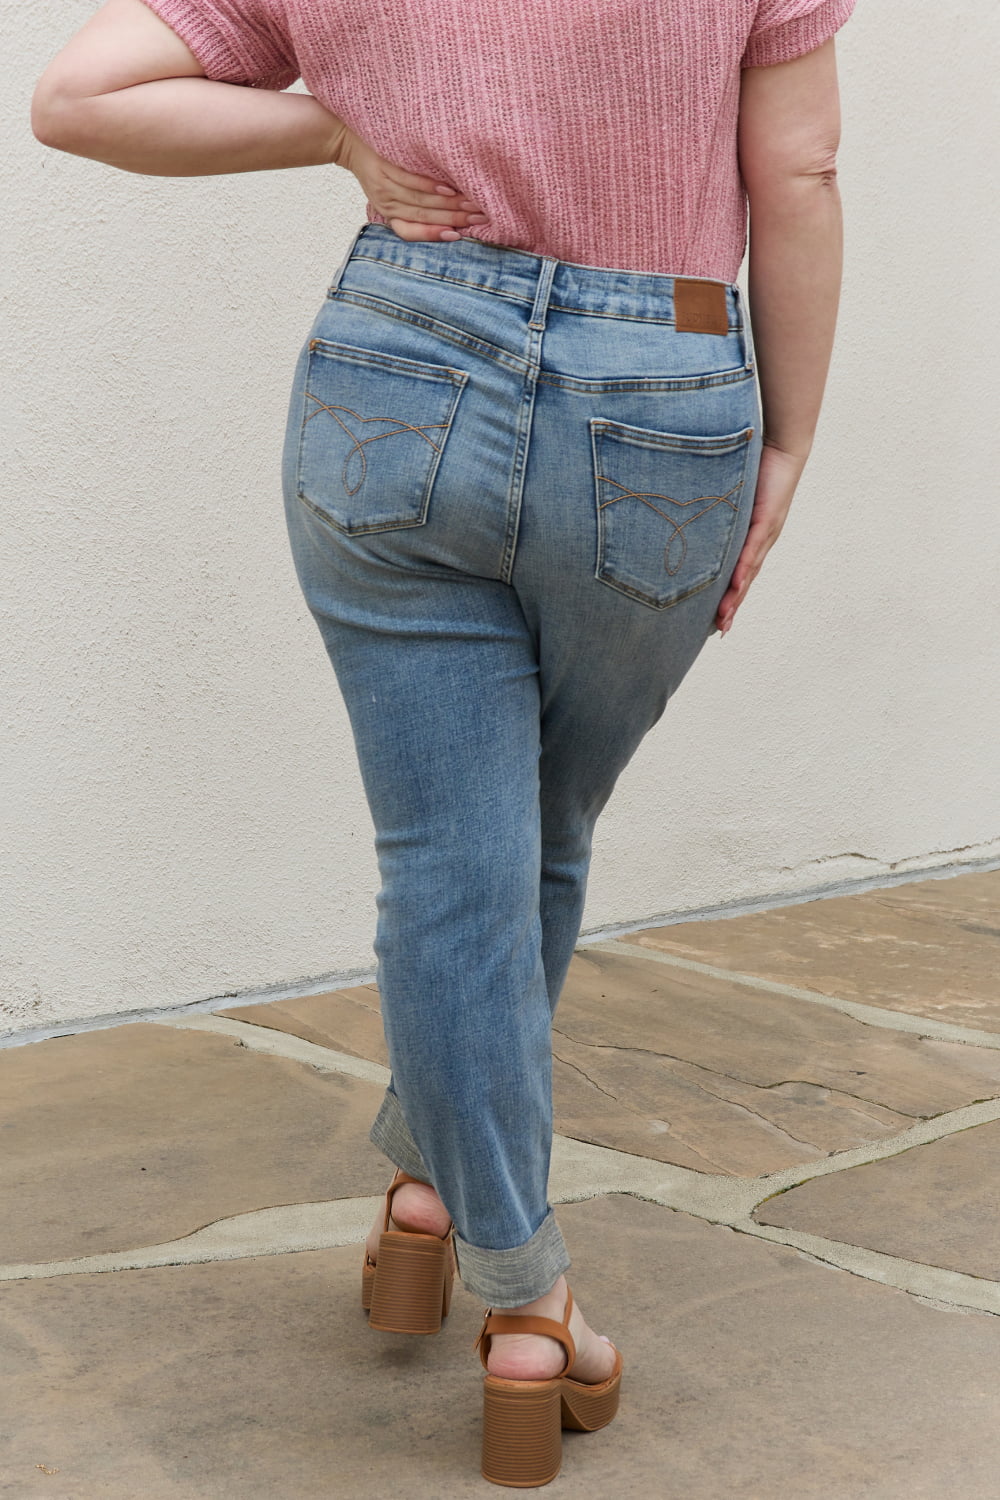 Back View, Plus Size, Judy Blue, Mid-Rise Boyfriend Fit with Destroyed Knee, Cuffed Jeans Style 88605